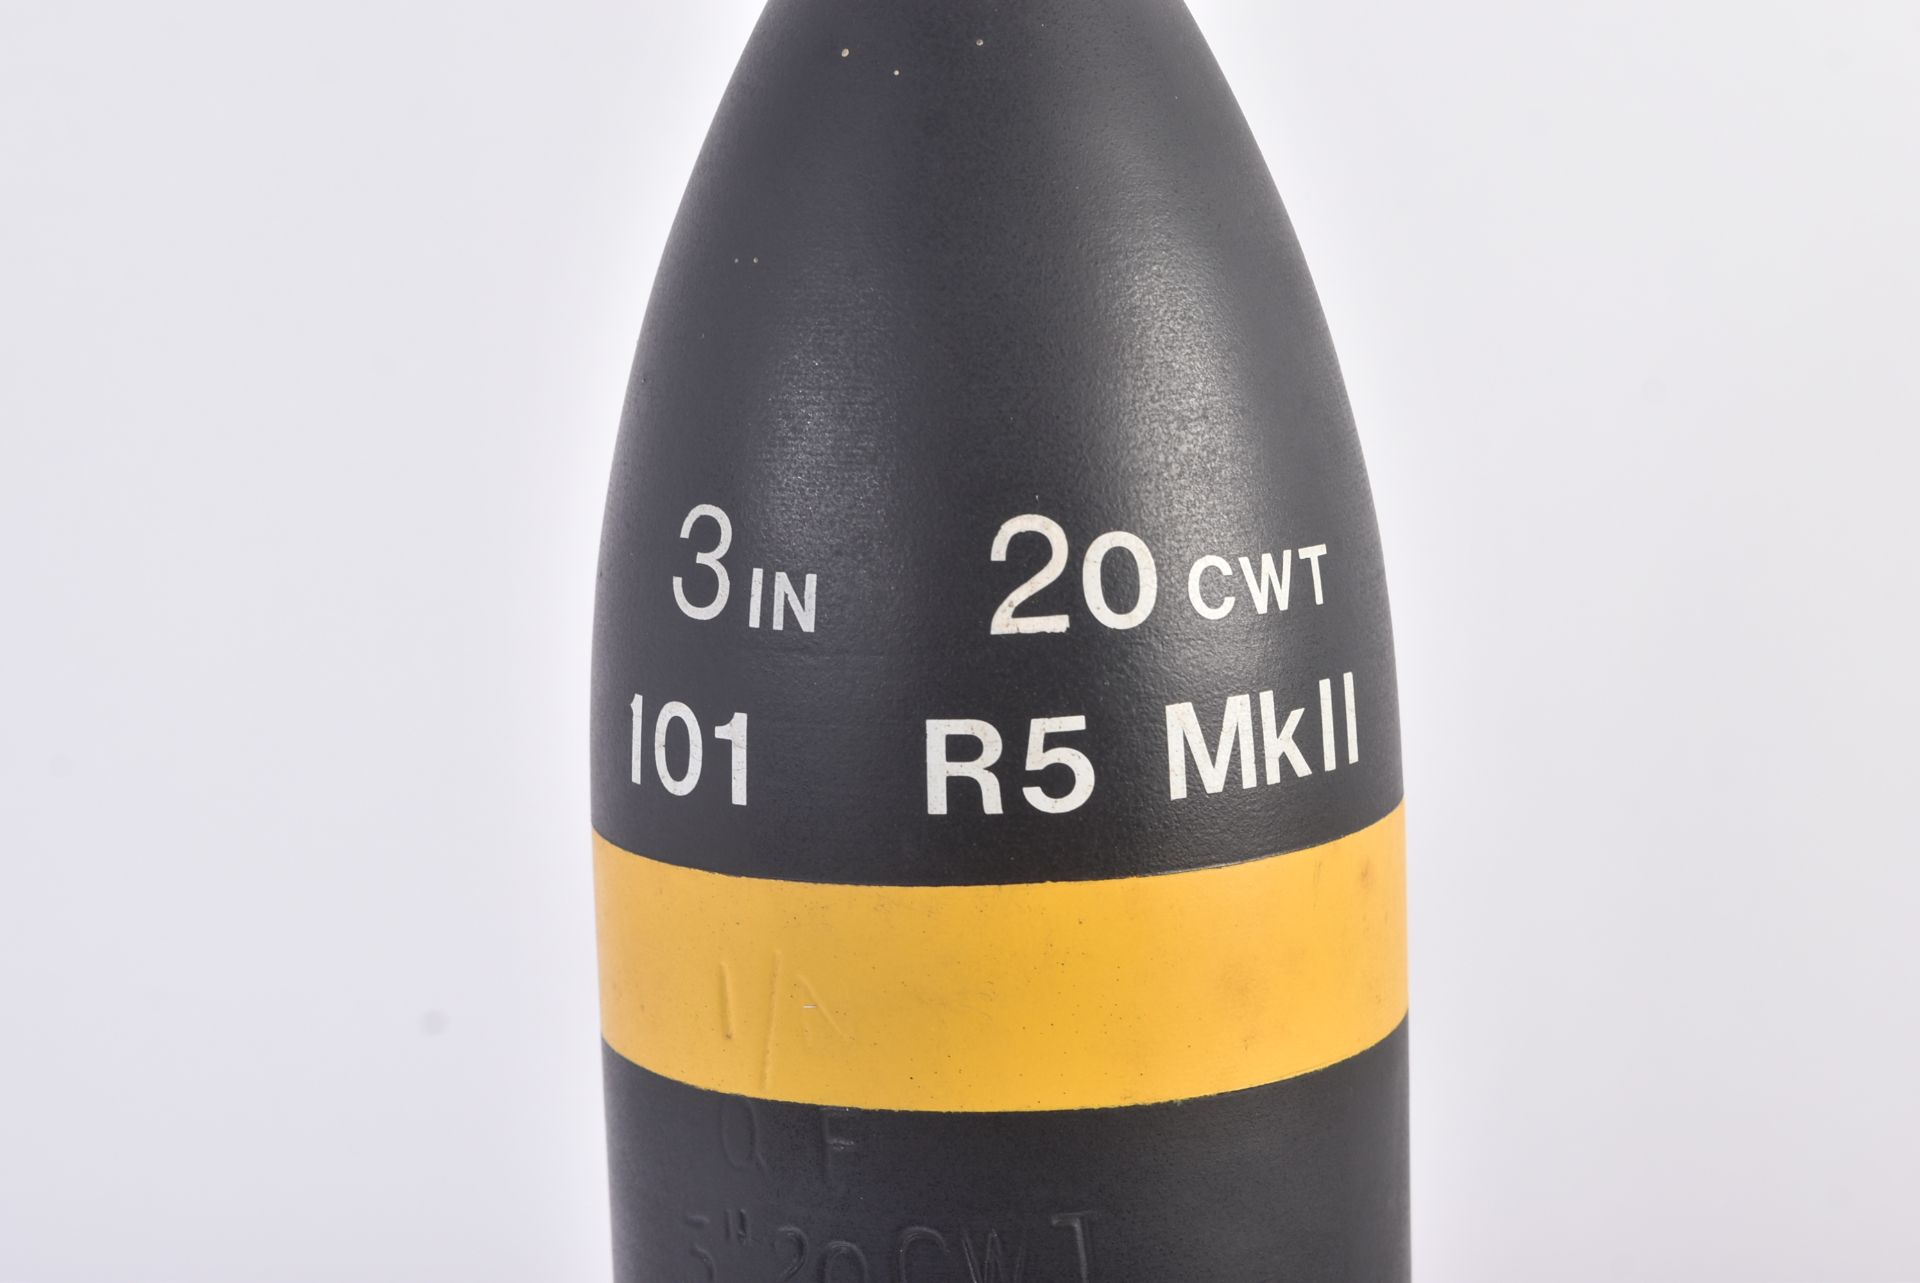 WWII SECOND WORLD WAR QUICK FIRING 3 INCH 20 CWT PROJECTILE - Image 2 of 5